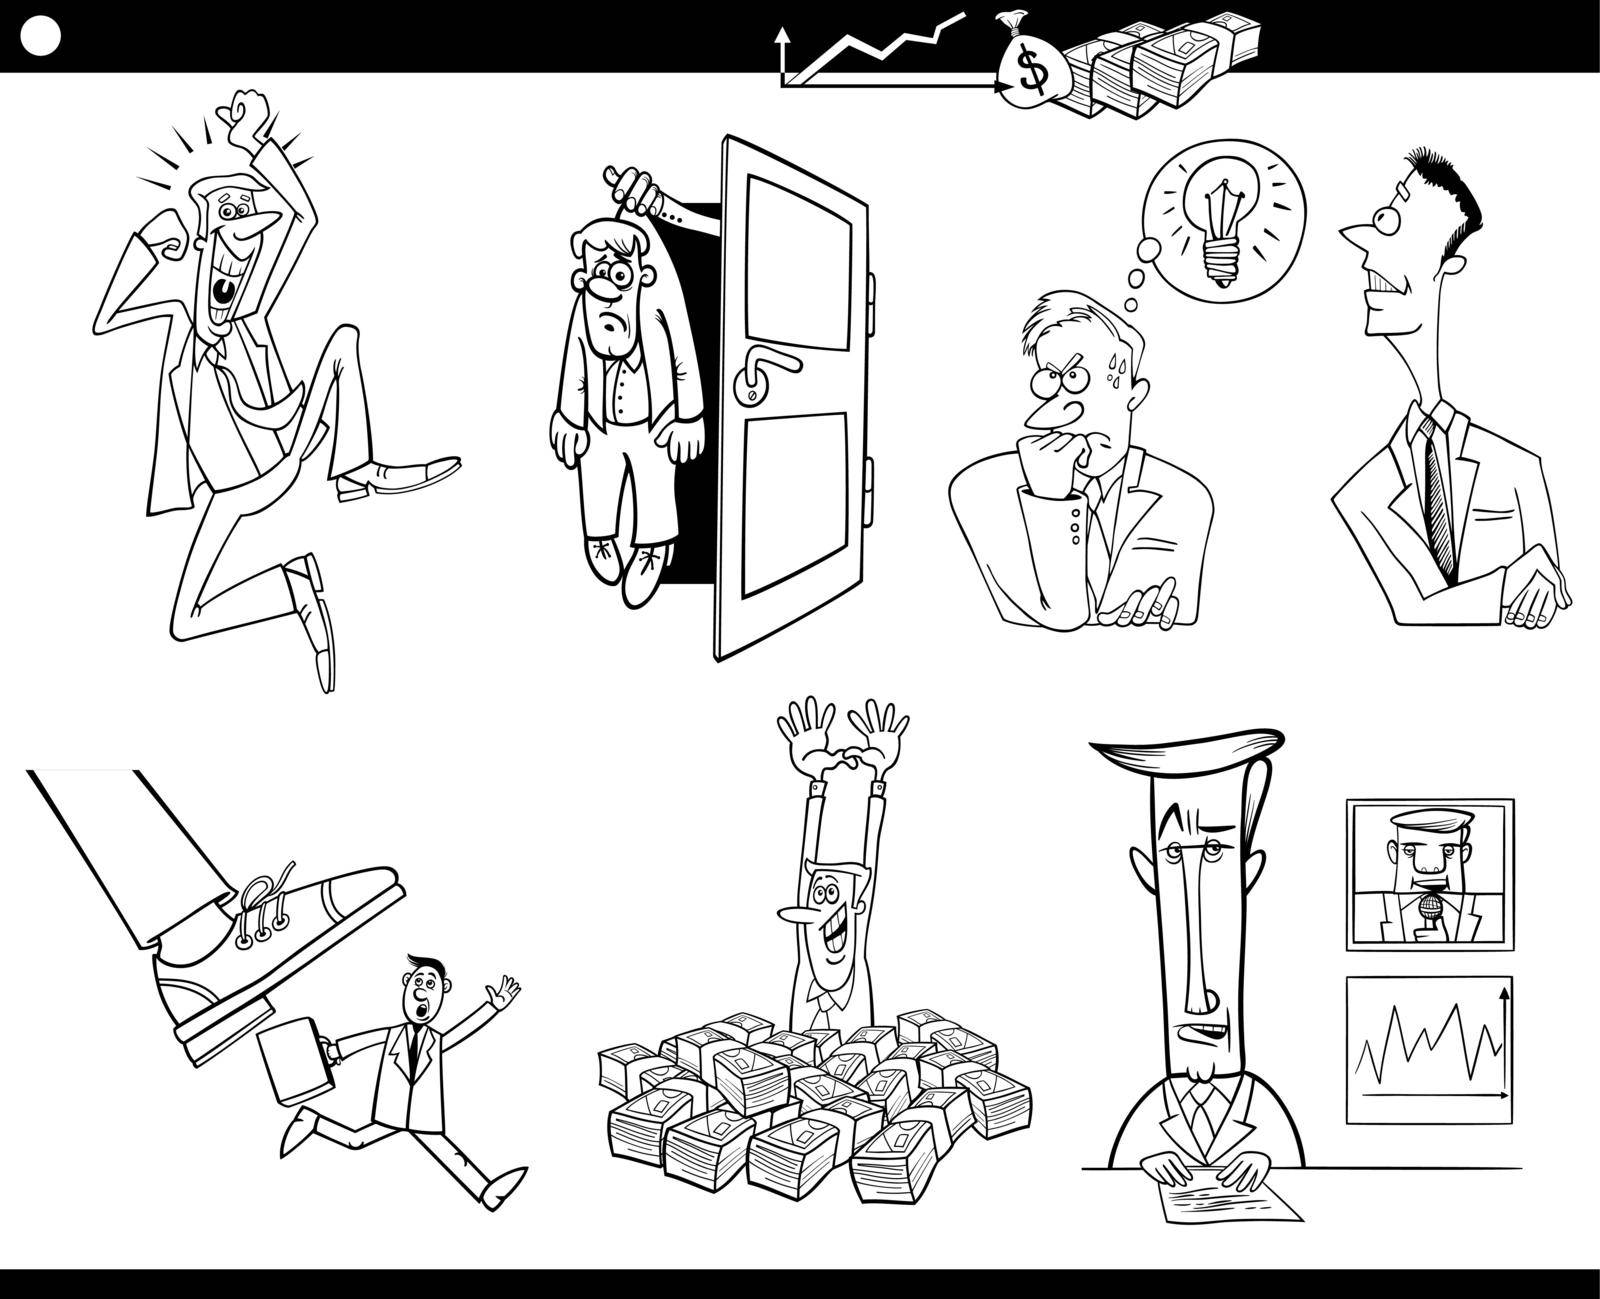 Black and white cartoon illustration of business concepts with funny people and businessmen characters set